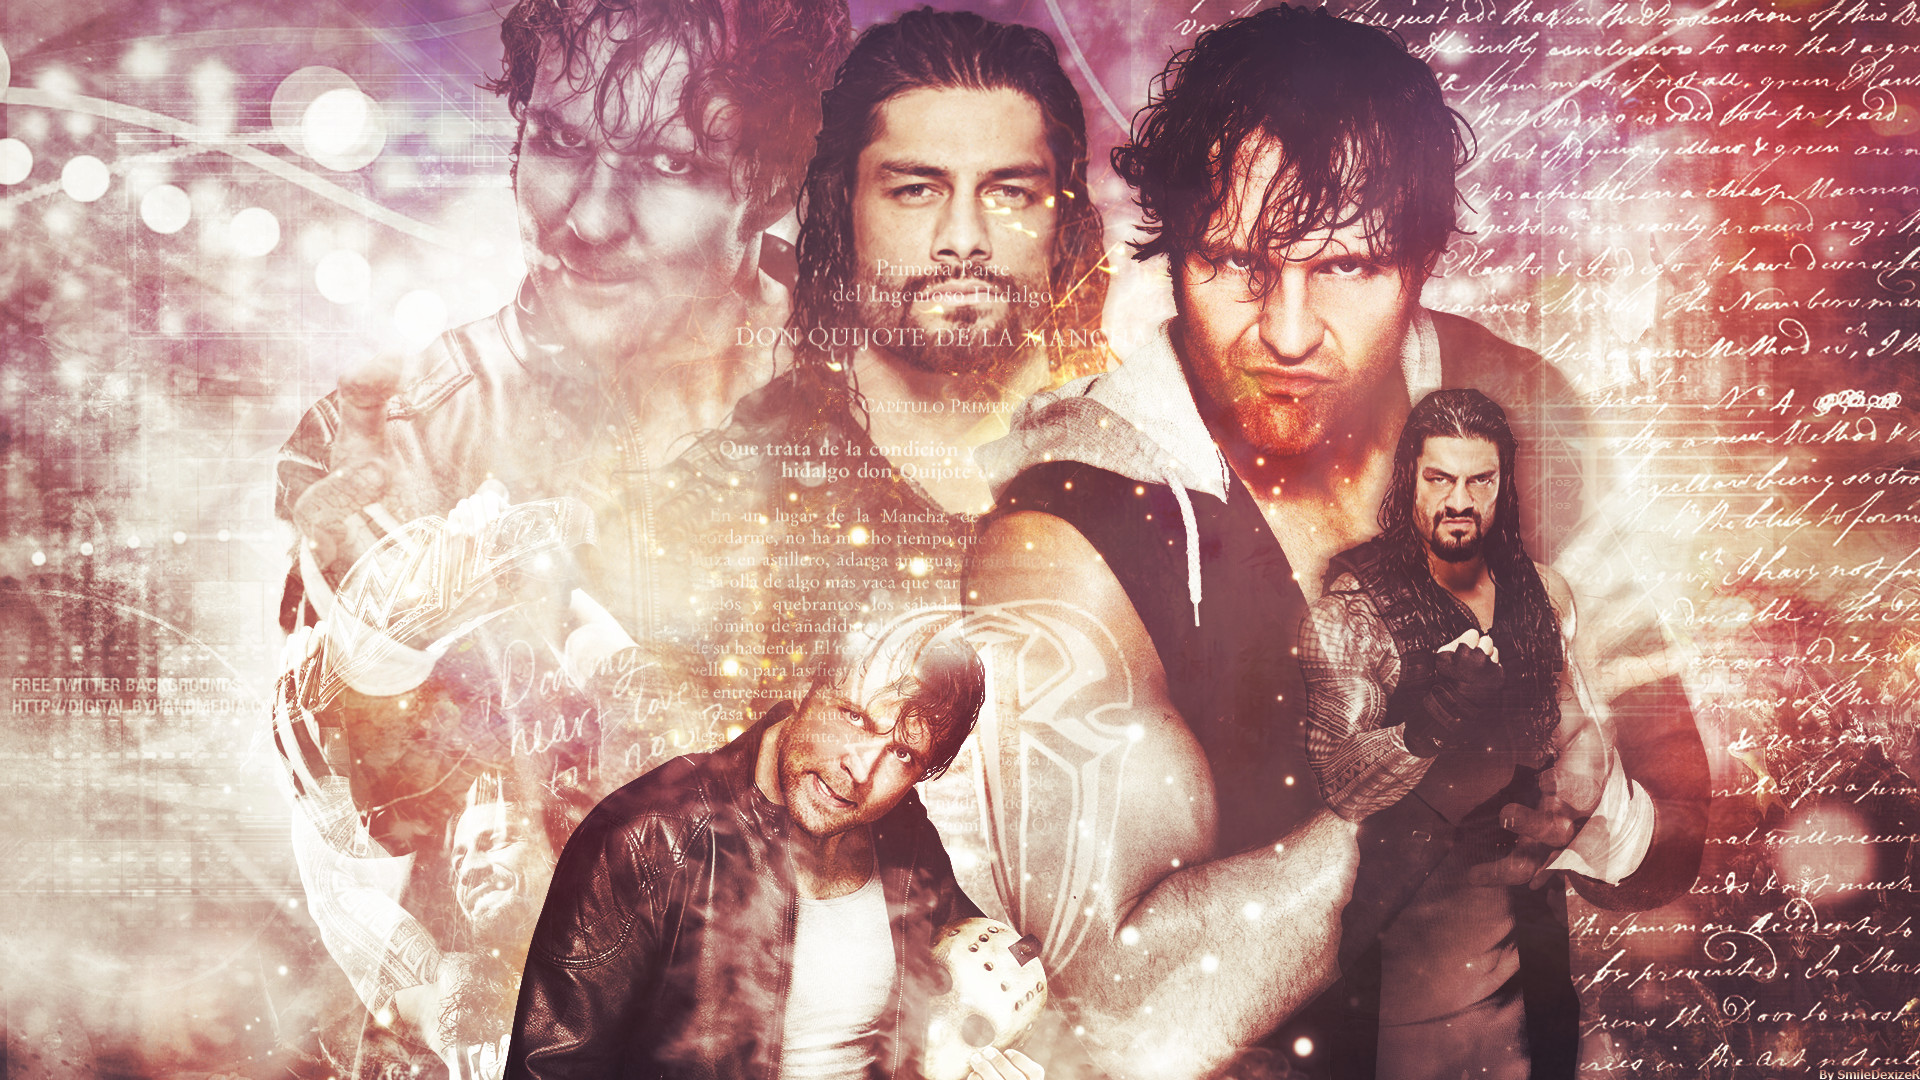 1920x1080 Roman Reigns and Dean Ambrose WWE Wallpaper by SmileDexizeR on .